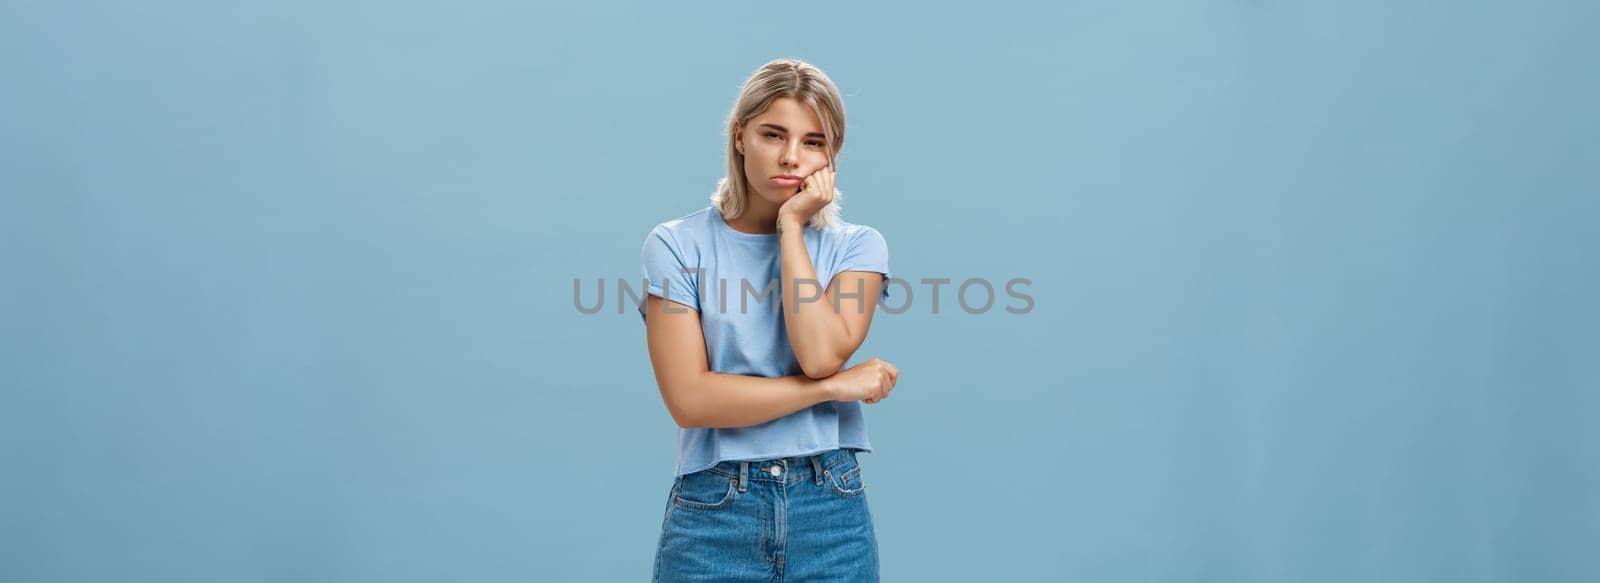 Lifestyle. Studio shot of displeased moody girlfriend feeling disappointed boyfriend spoilt date leaning head on palm sulking from dissatisfaction and squinting being offended posing over blue background.